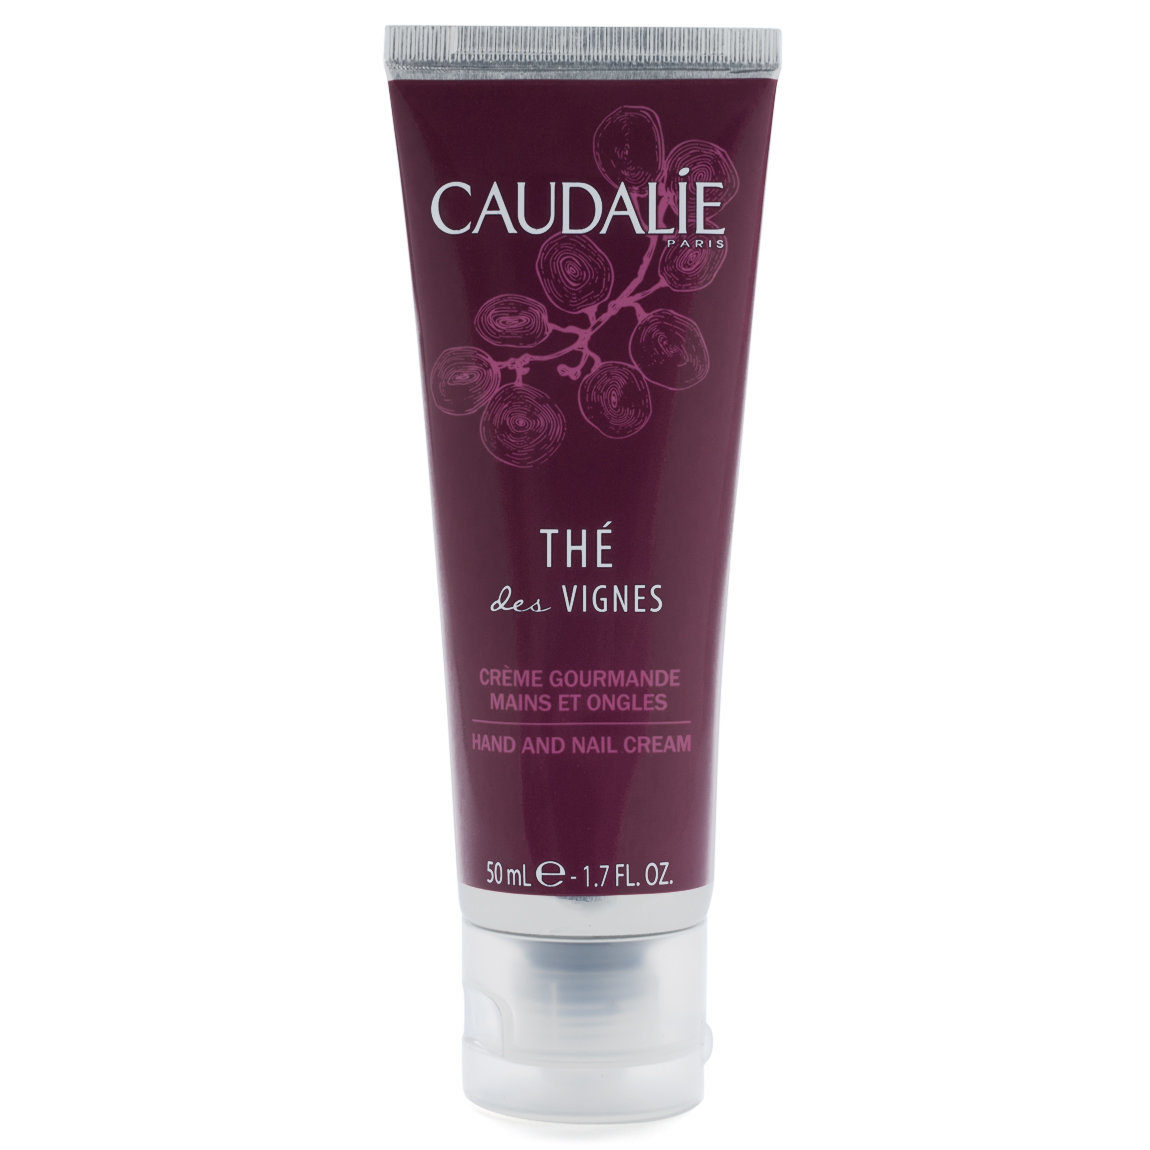 Caudalie Thé Des Vignes Hand And Nail Cream alternative view 1 - product swatch.